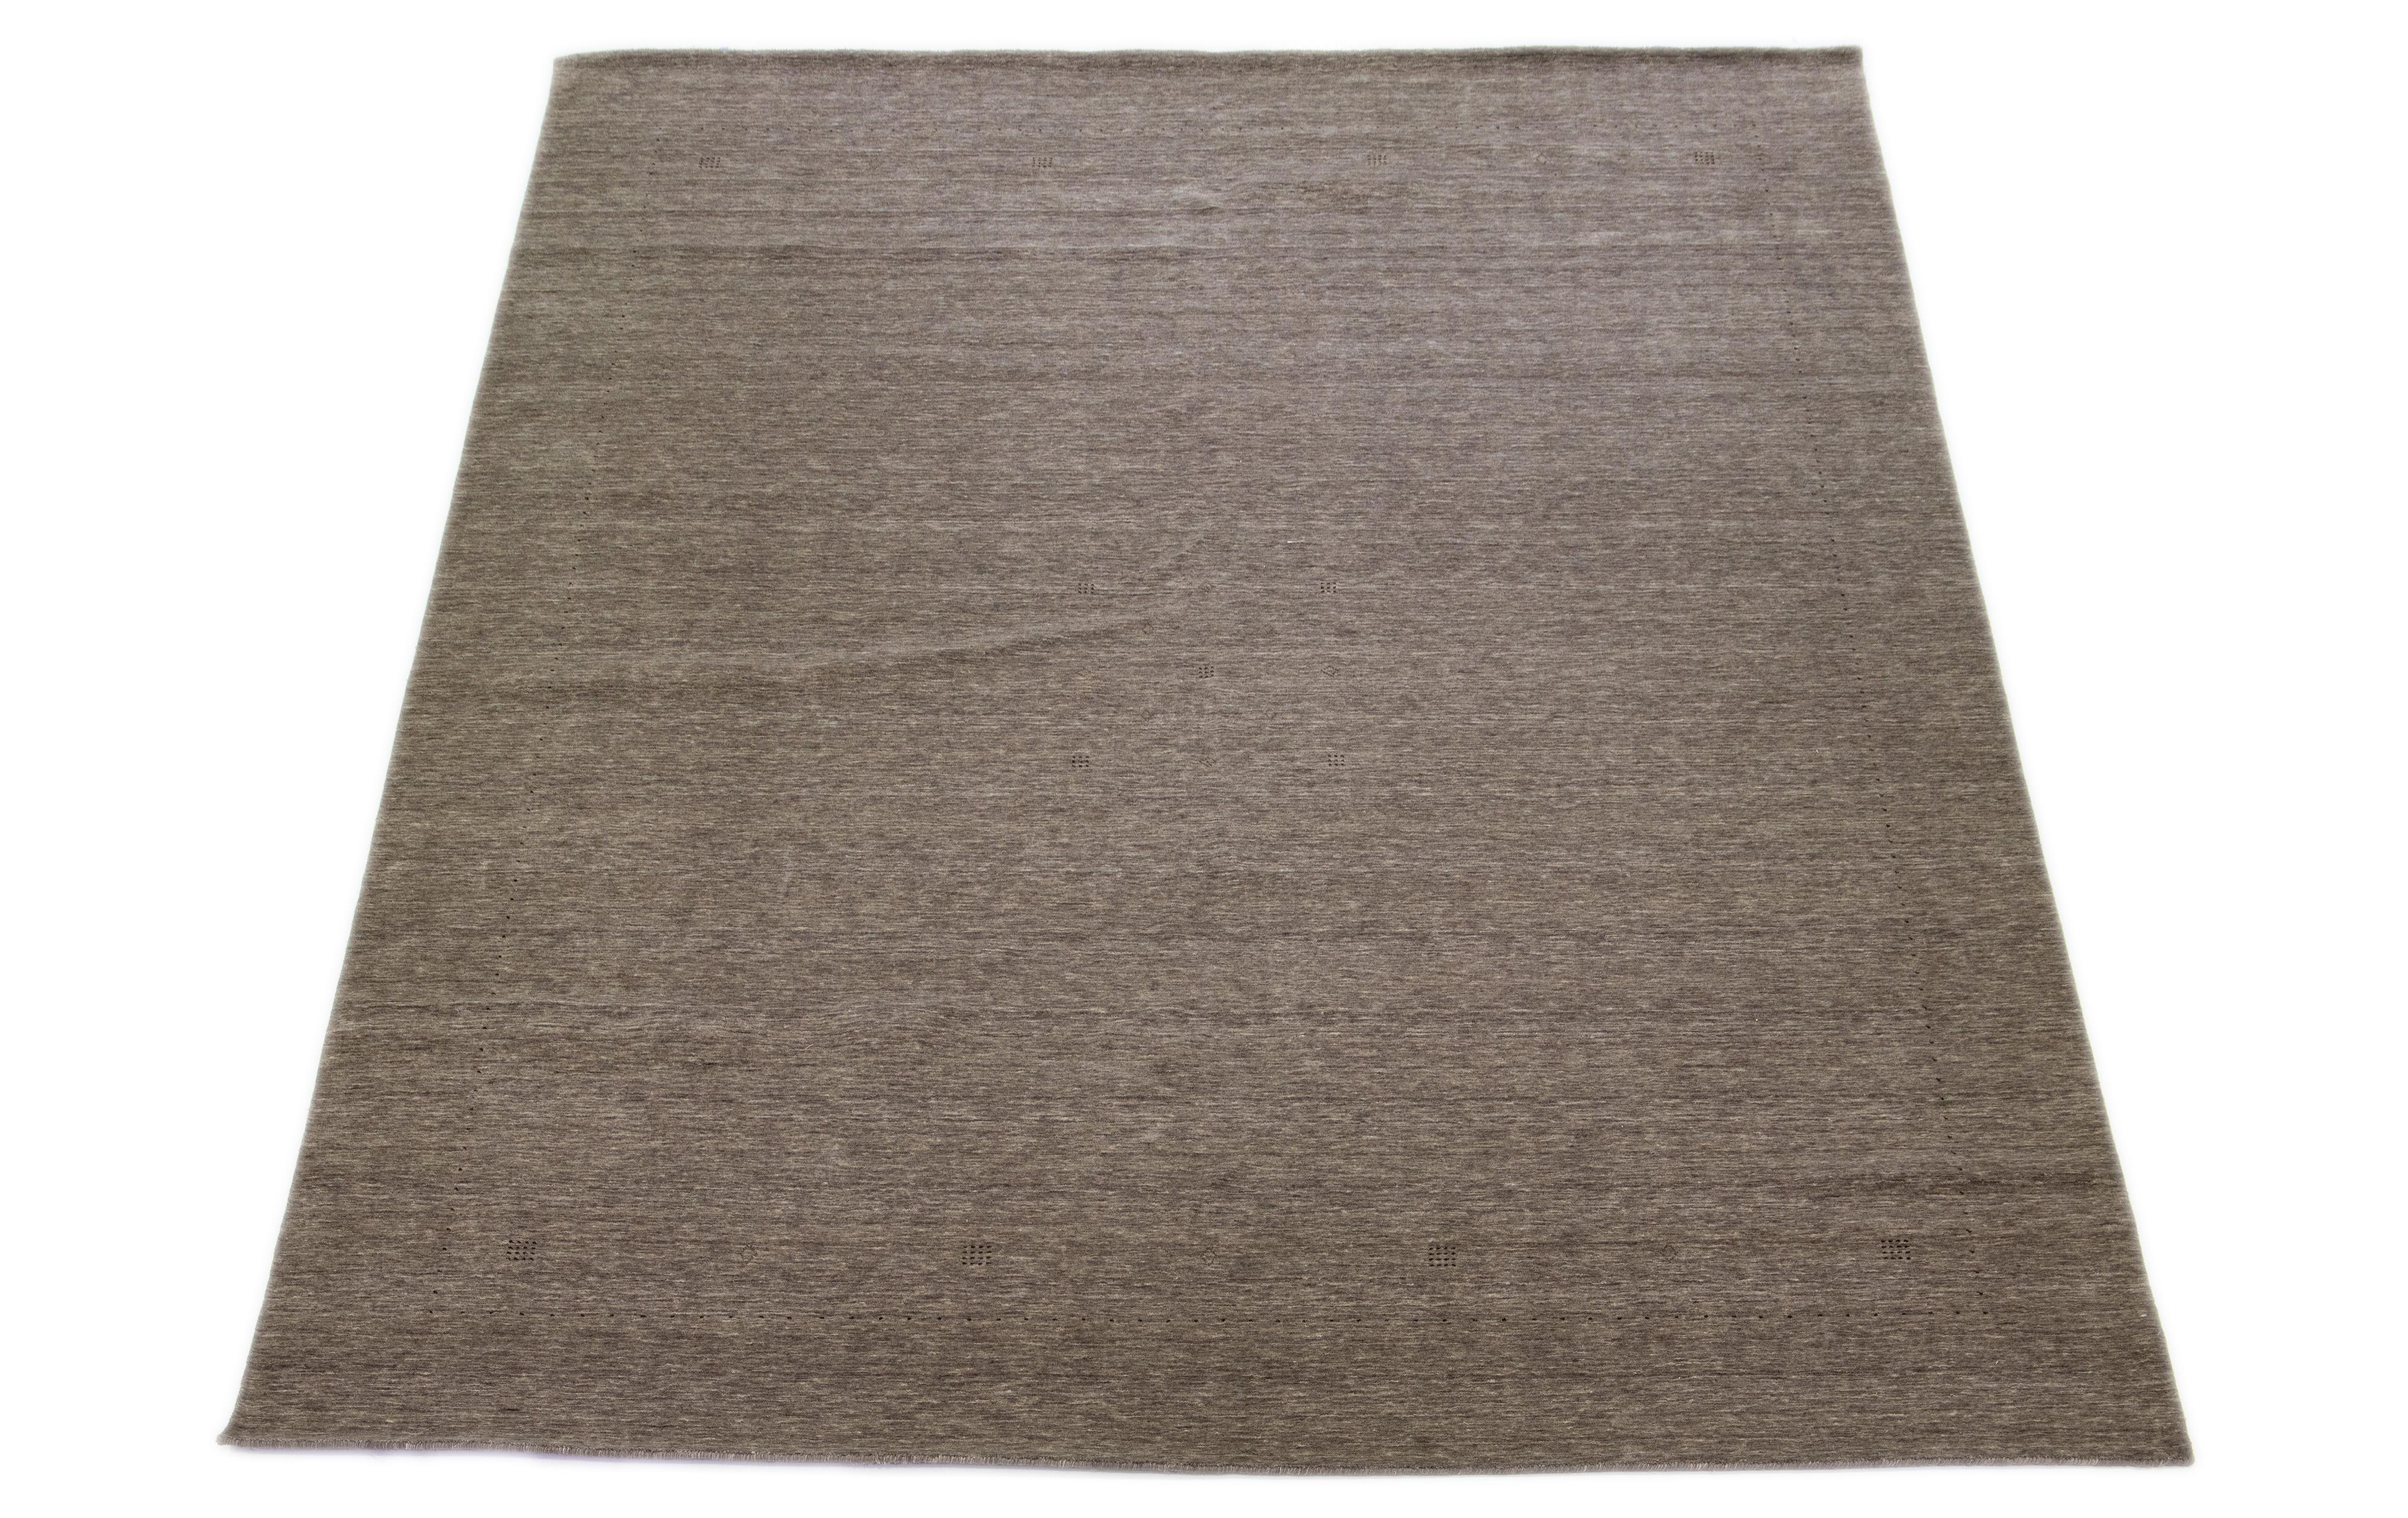 This modern Gabbeh rug, hand-loomed with exceptional care, embodies elegance and contemporary style with its minimalist geometric pattern. The alluring brown base is finely accented with dark brown details.

This rug measures 12'1